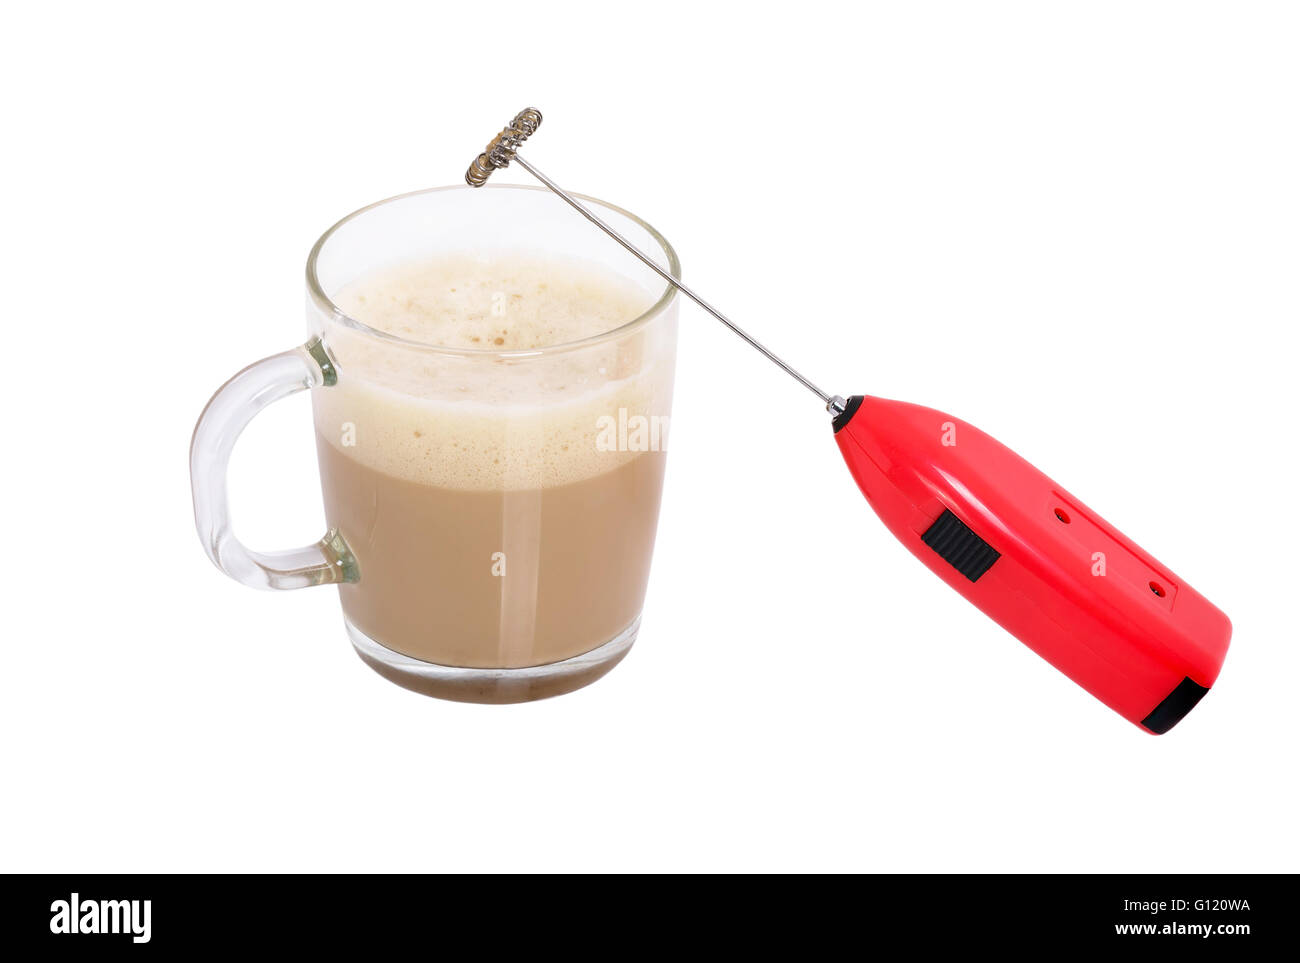 https://c8.alamy.com/comp/G120WA/device-for-frothing-milk-and-a-cup-of-coffee-on-a-white-background-G120WA.jpg